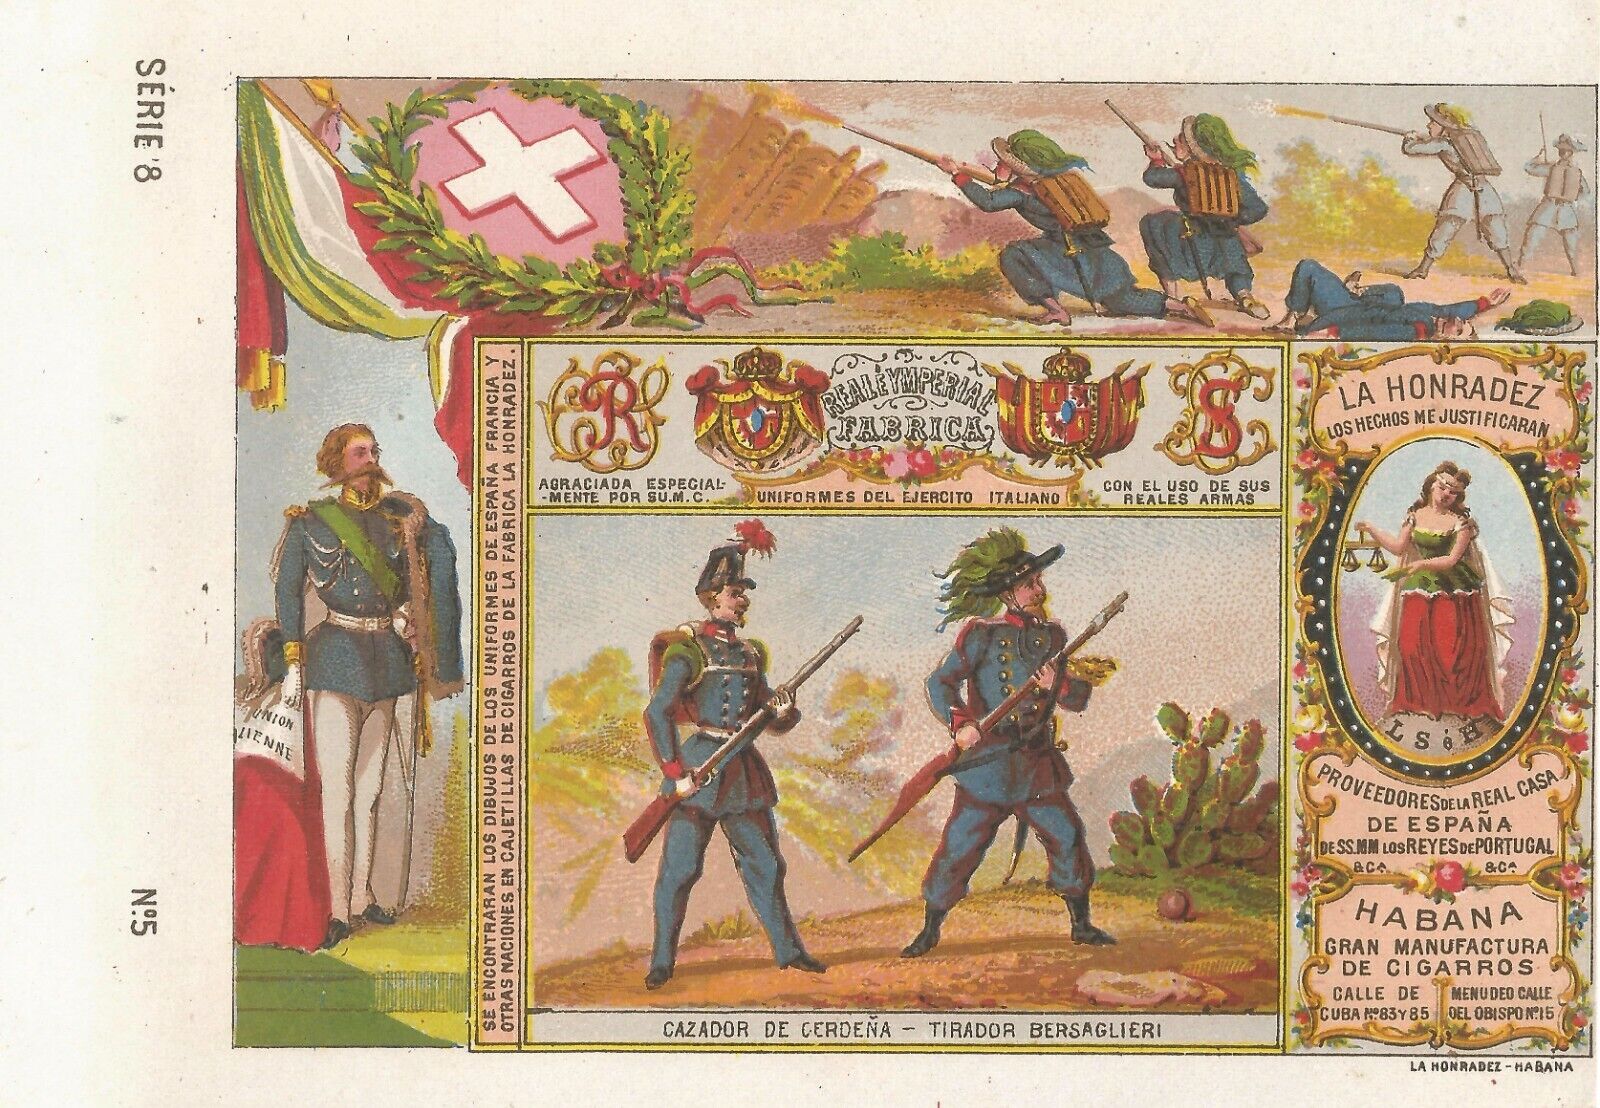 1860S ITALIAN ITALY ARMY UNIFORM  EMPTY CIGARETTES 10 PACKS LABELS WRAPPERS CUBA